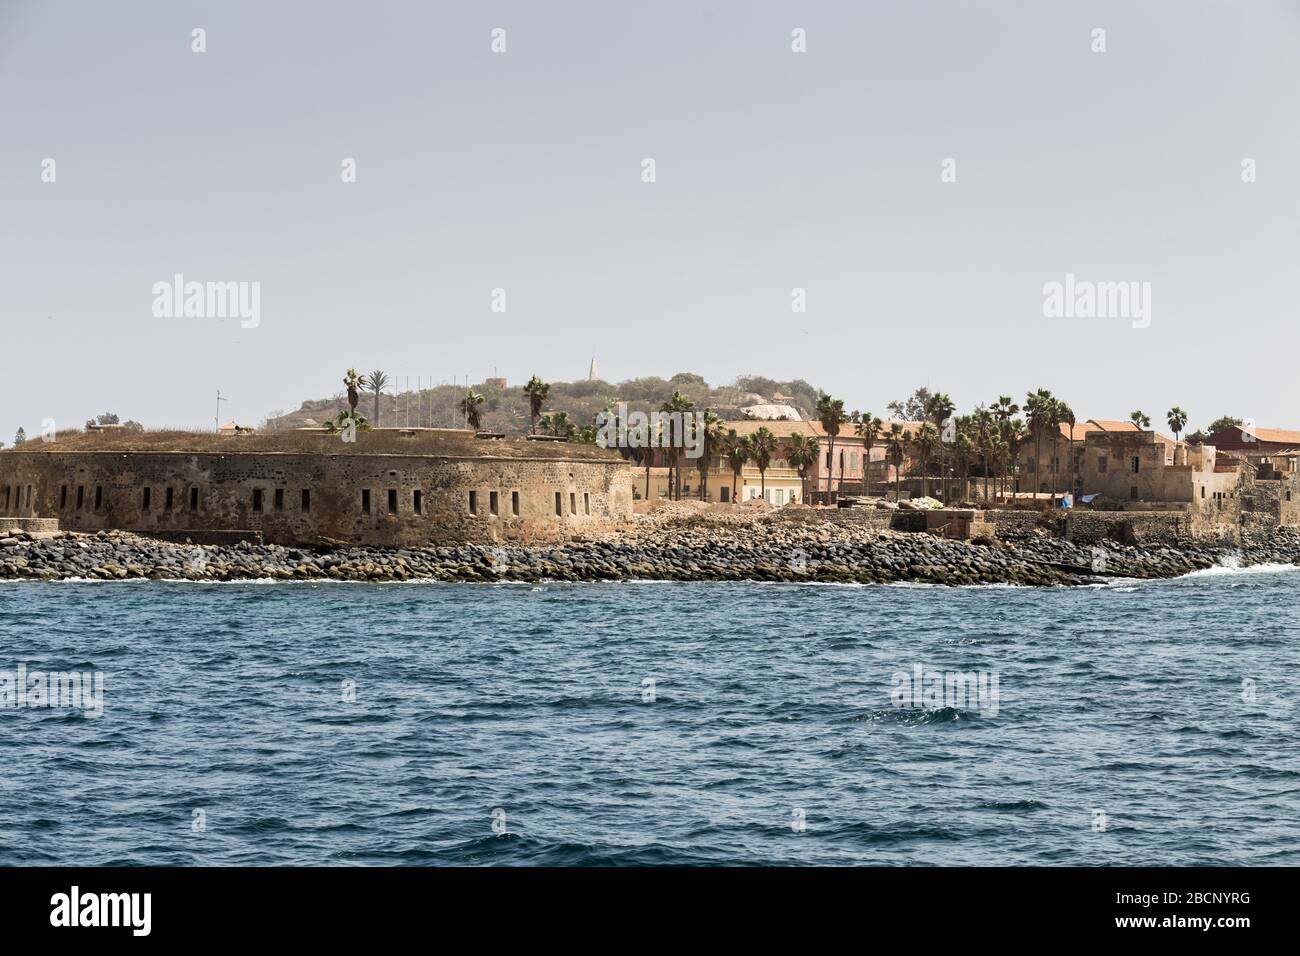 The view on Gorée Island, Senegal from a boat Stock Photo